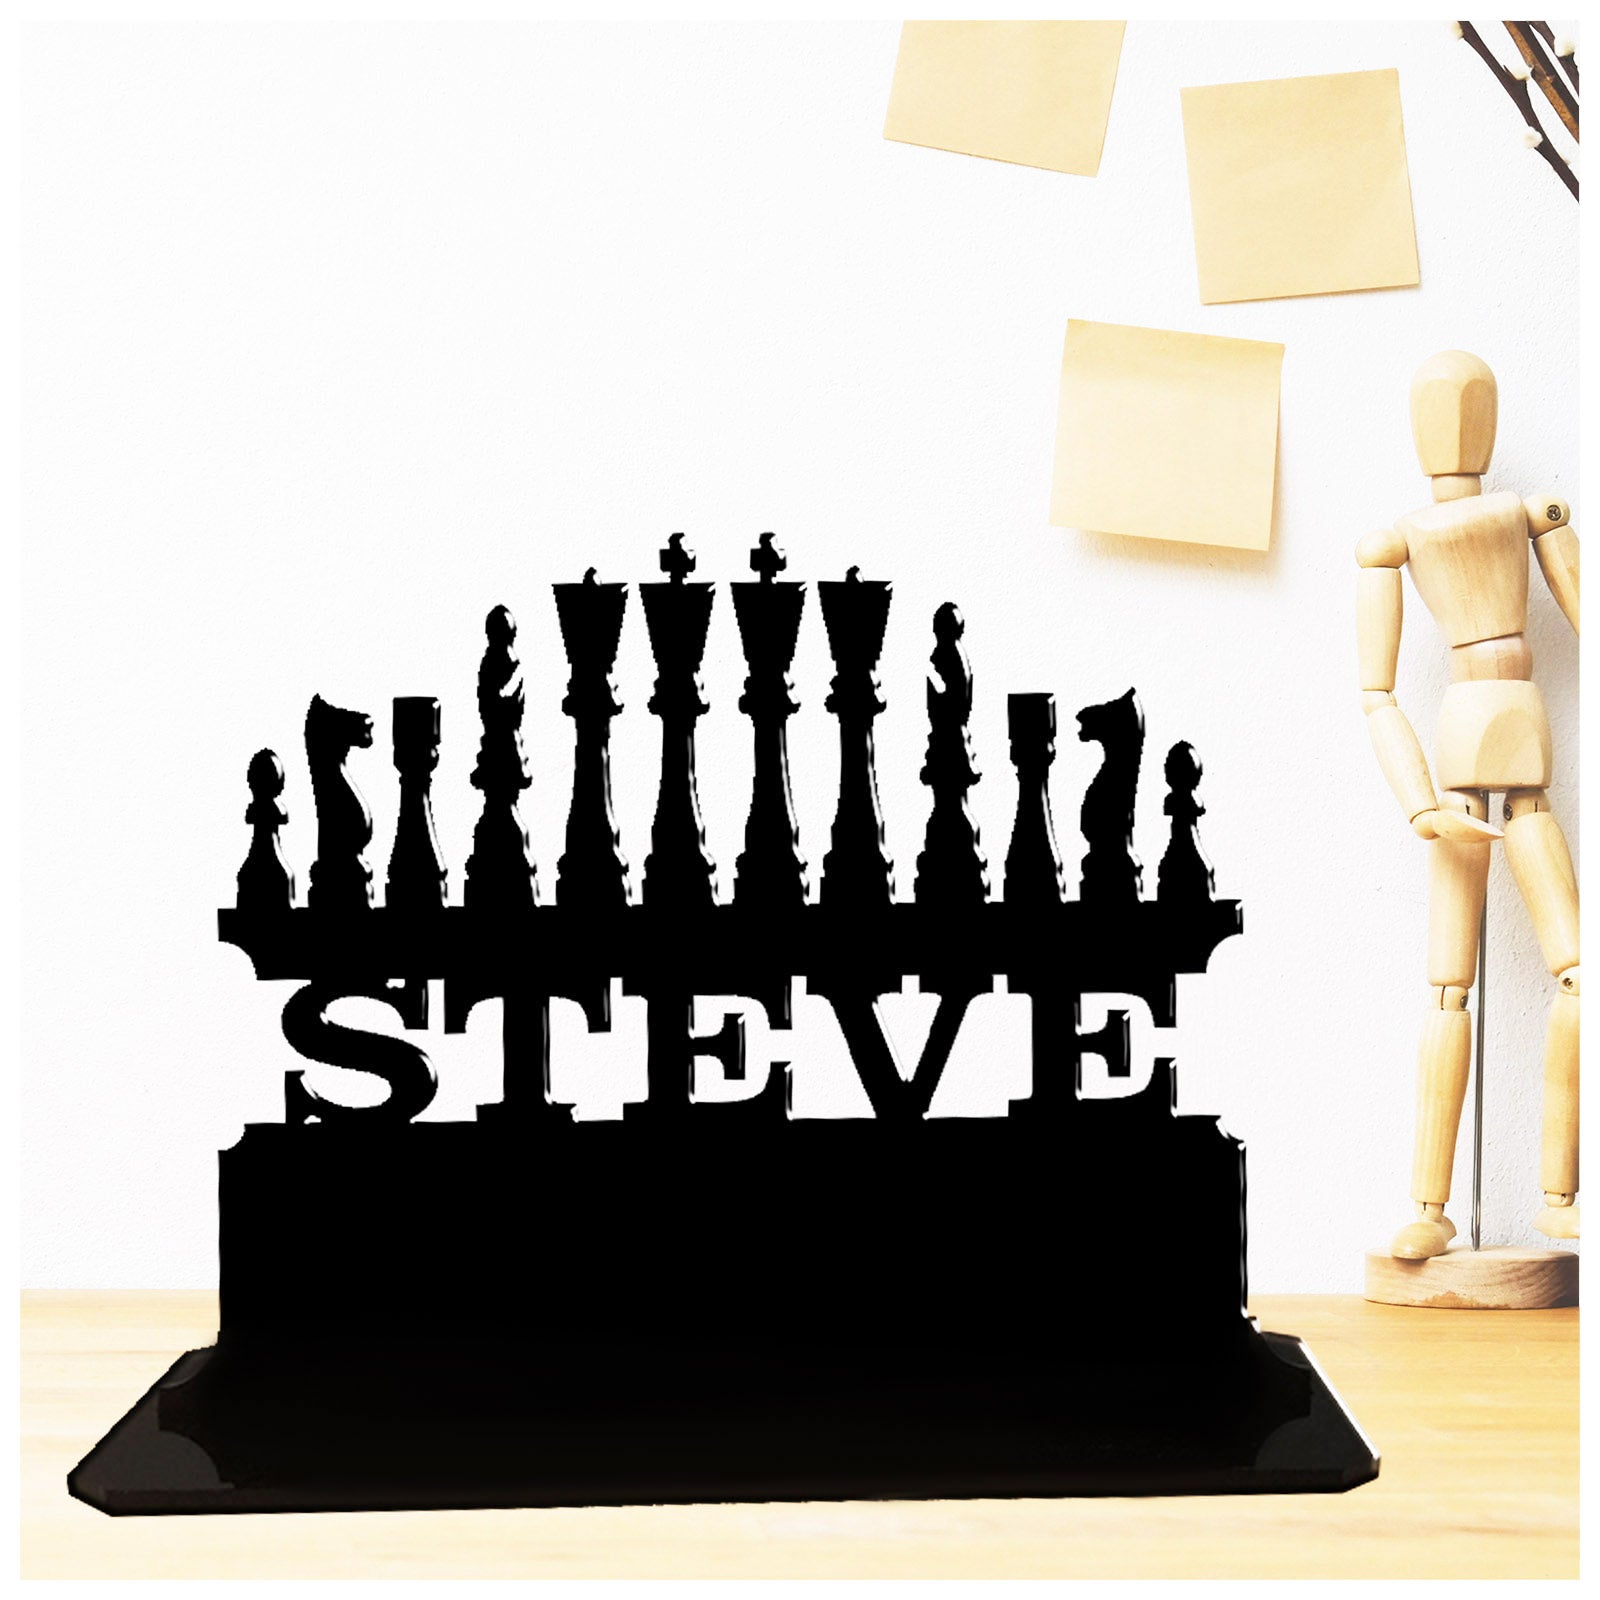 Personalised acrylic gifts for chess enthusiasts. This standalone present is a keepsake ornament plaque.